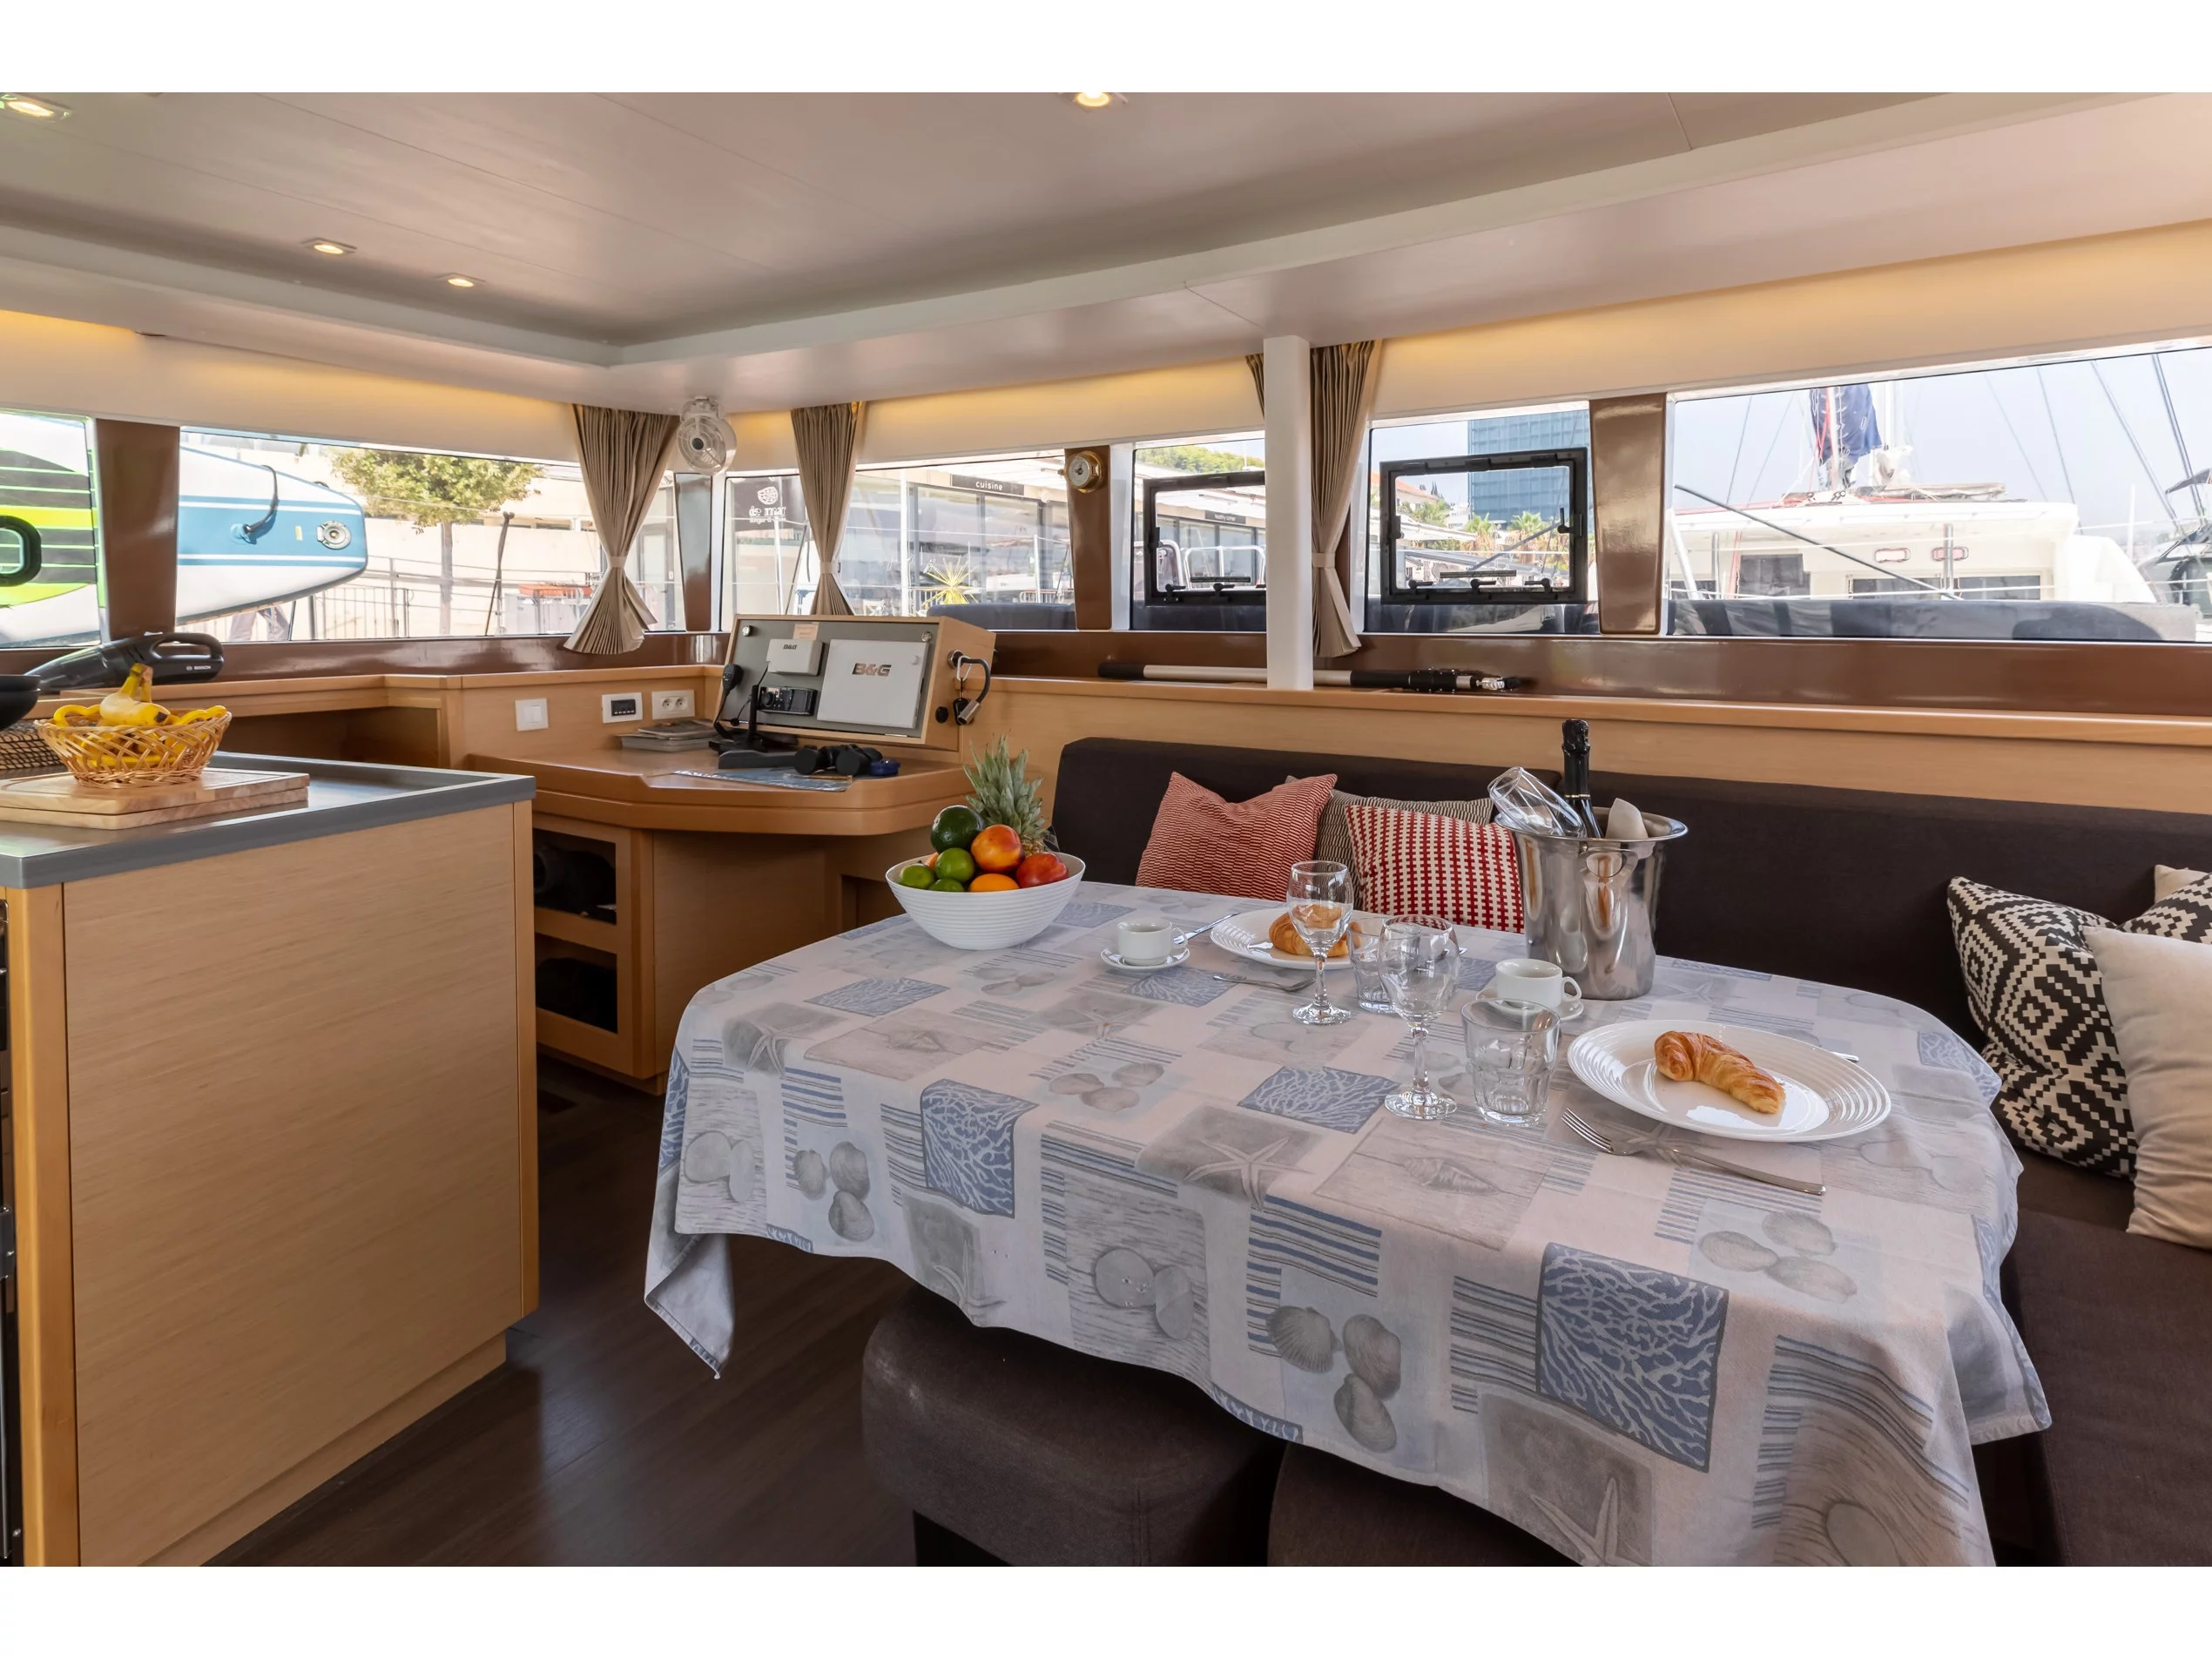 Lagoon 450 F (2017) equipped with generator, A/C ( (PRINCESS KARLA I) Interior image - 20